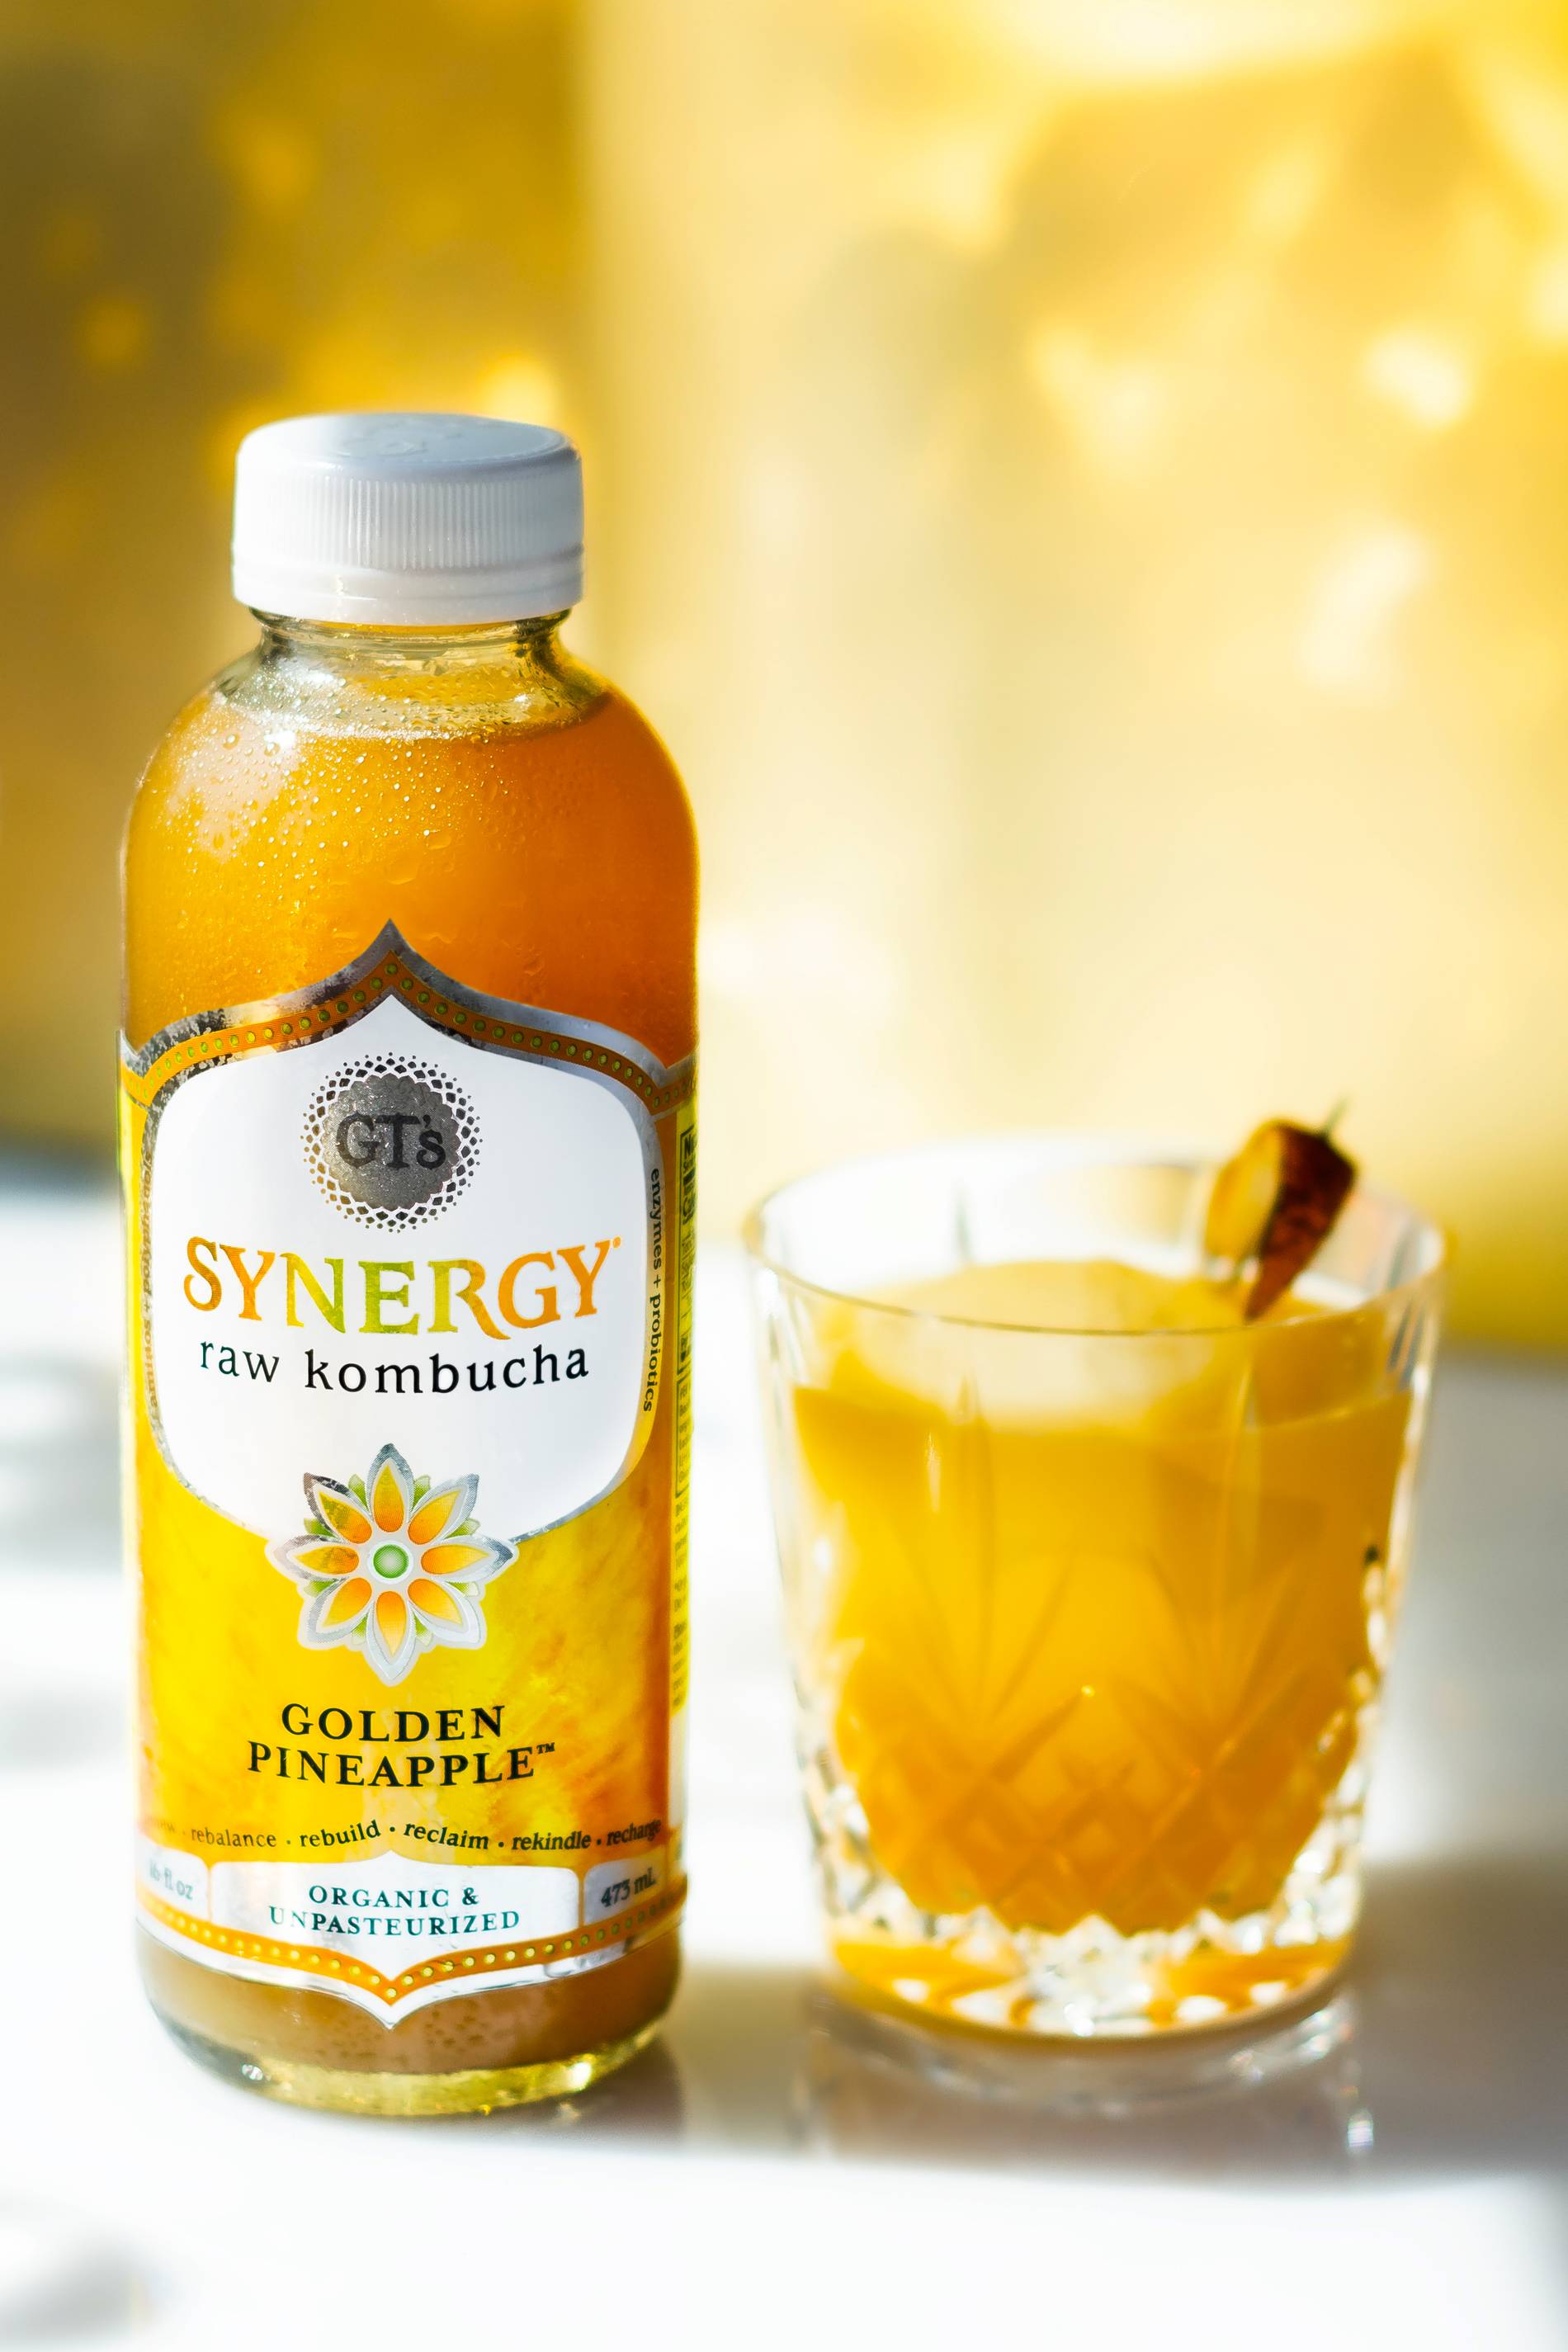 Gold Fashioned kombucha cocktail from GT's